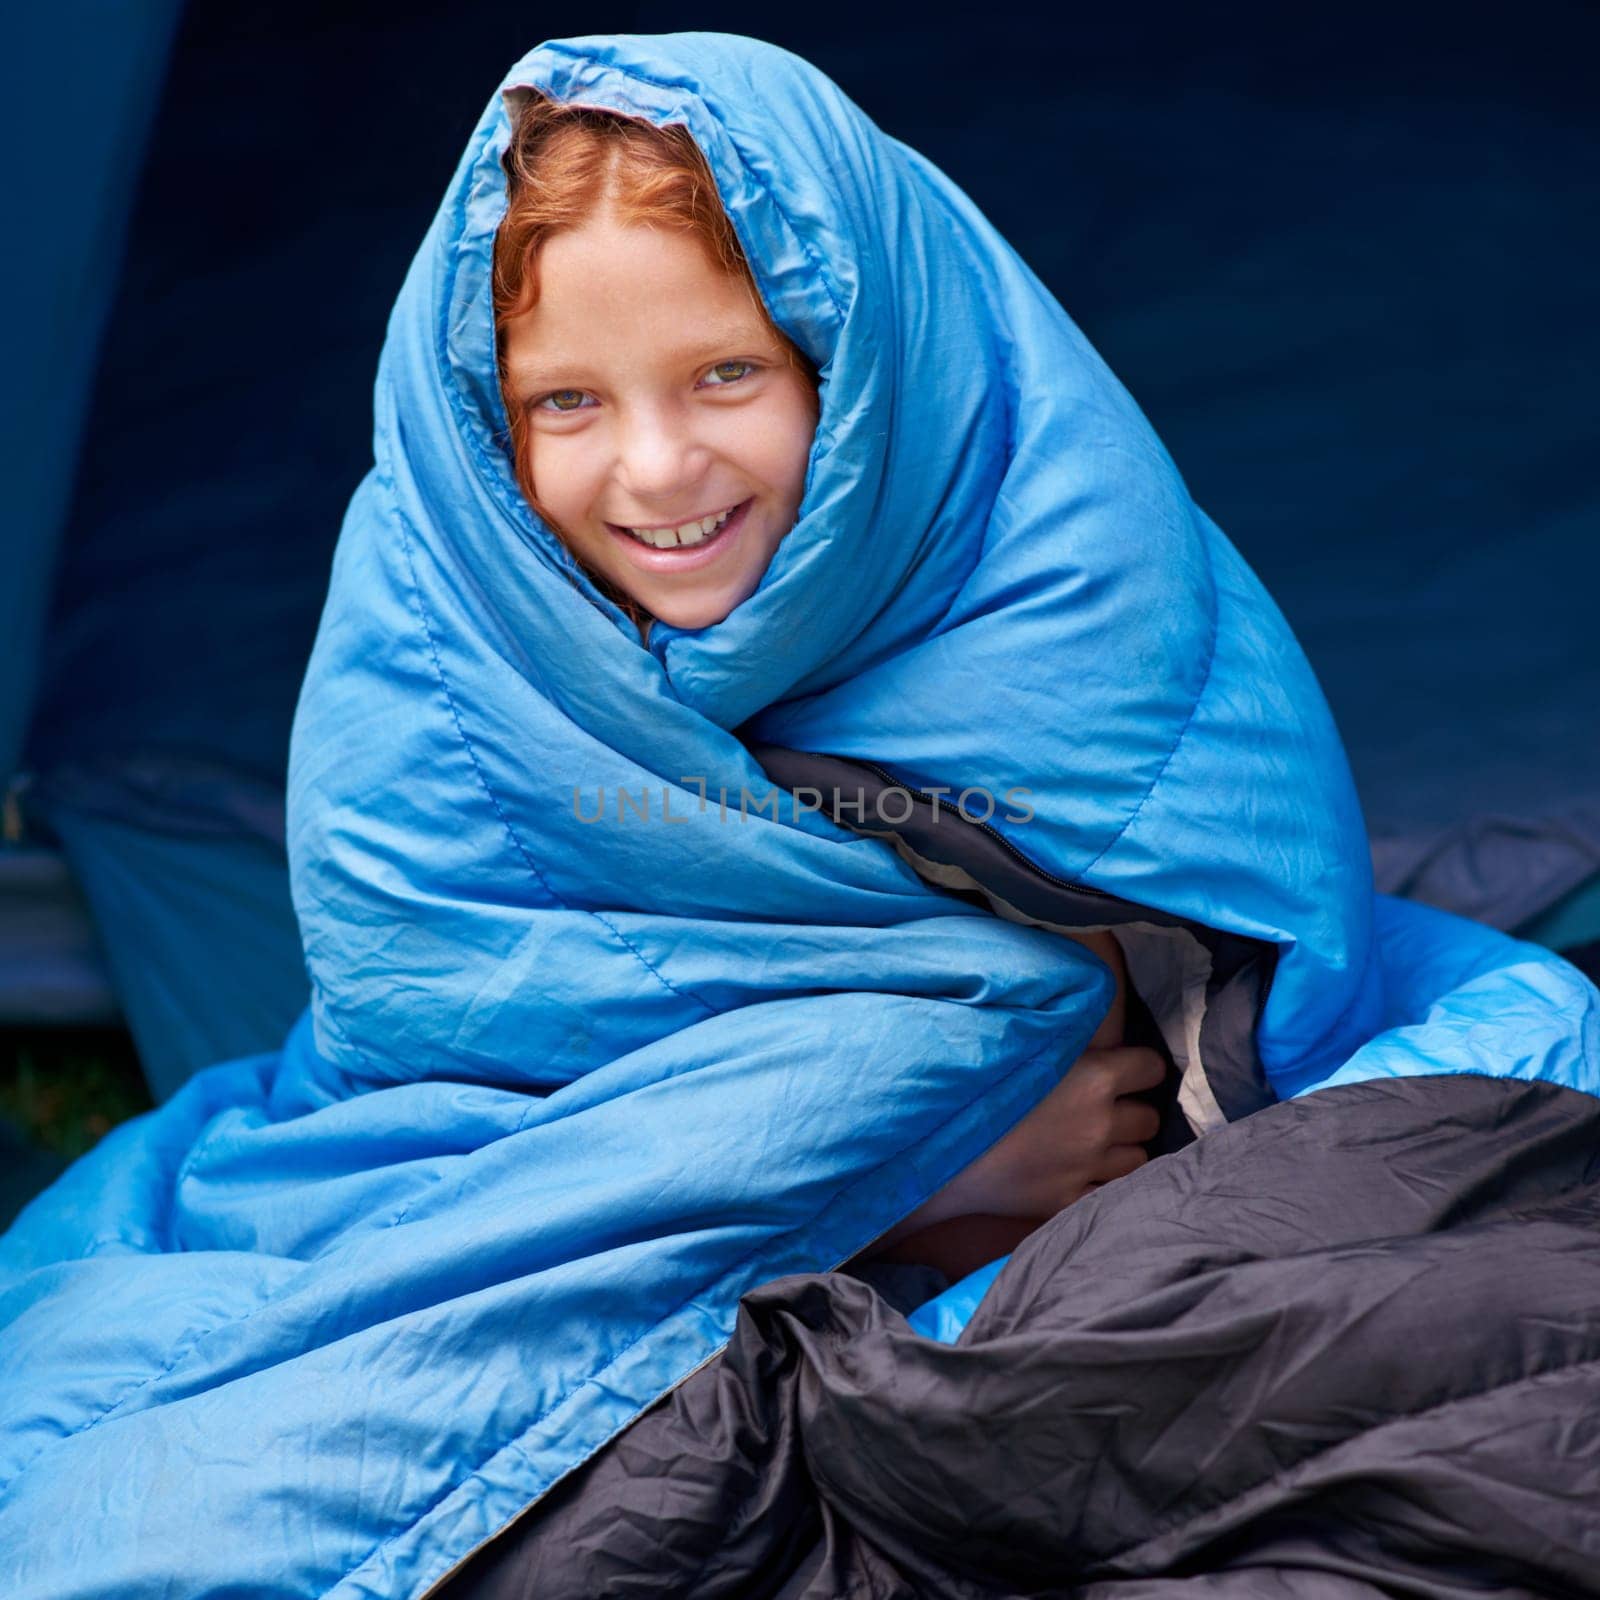 Happy, camping and portrait of child in sleeping bag for resting, relax and comfortable in tent. Travel gear, youth and girl in sleep sack for adventure on holiday, vacation and weekend outdoors.